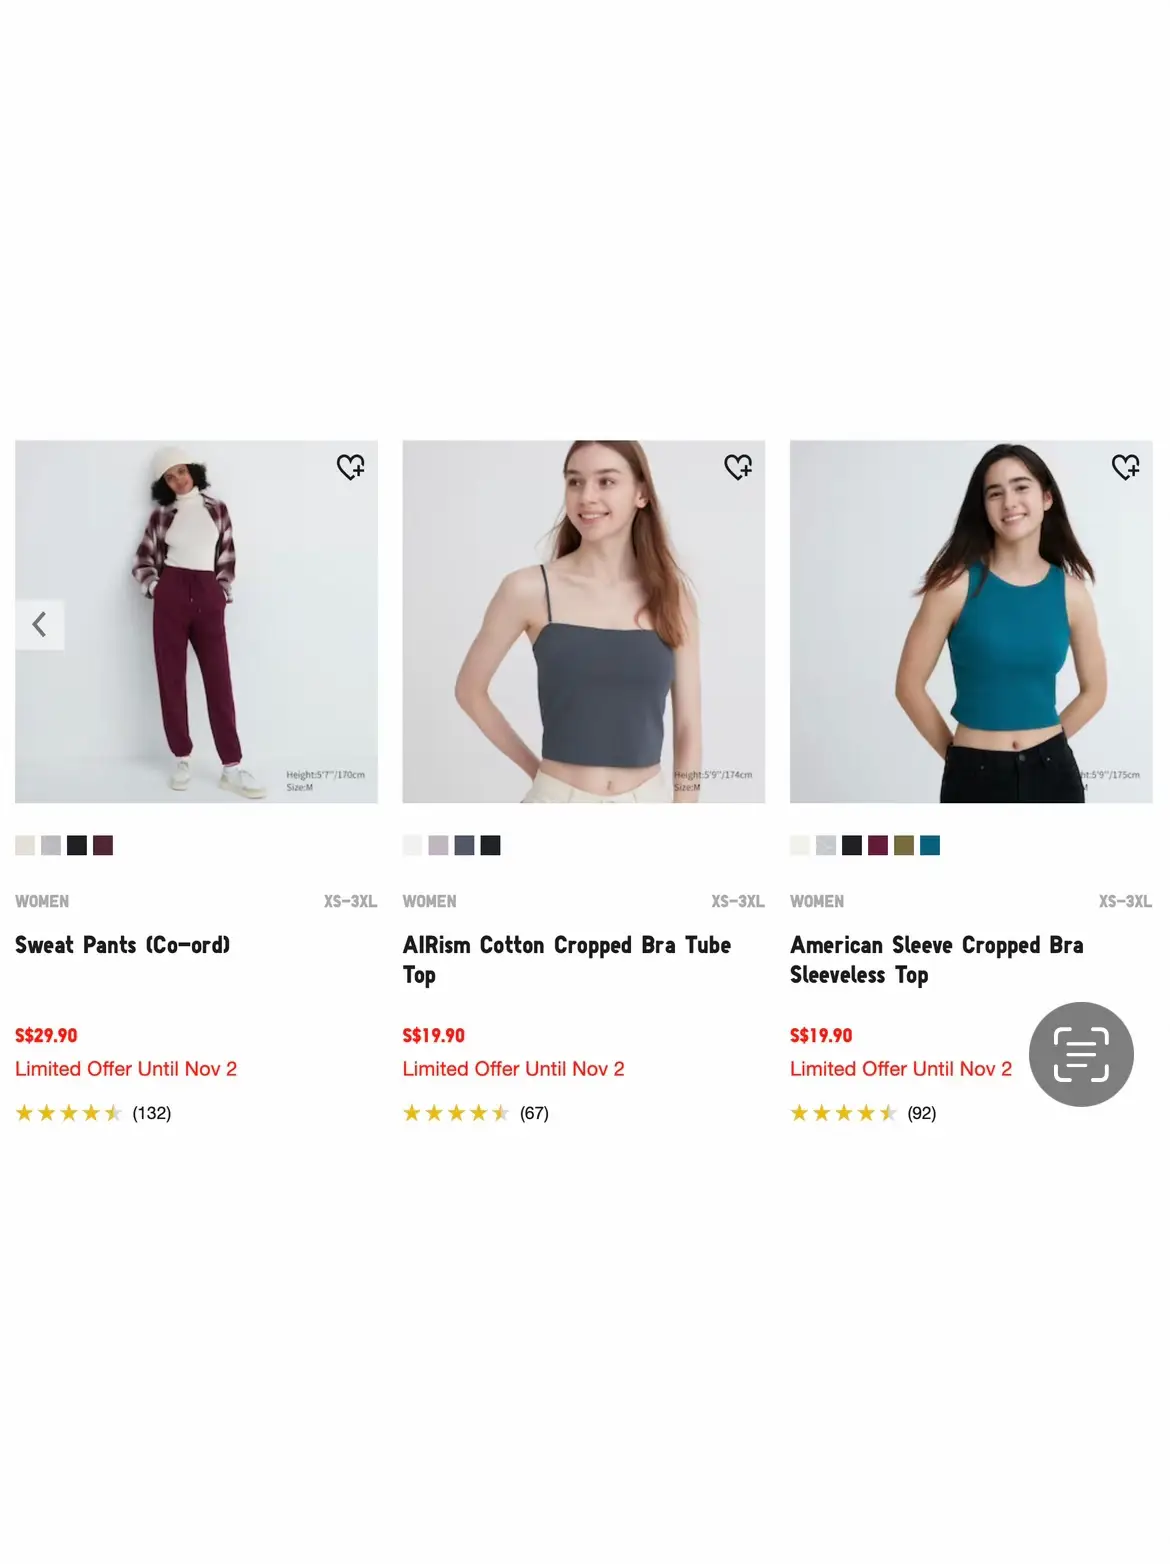 Uniqlo Singapore - With the AIRism BRATOP, ladies can now enjoy